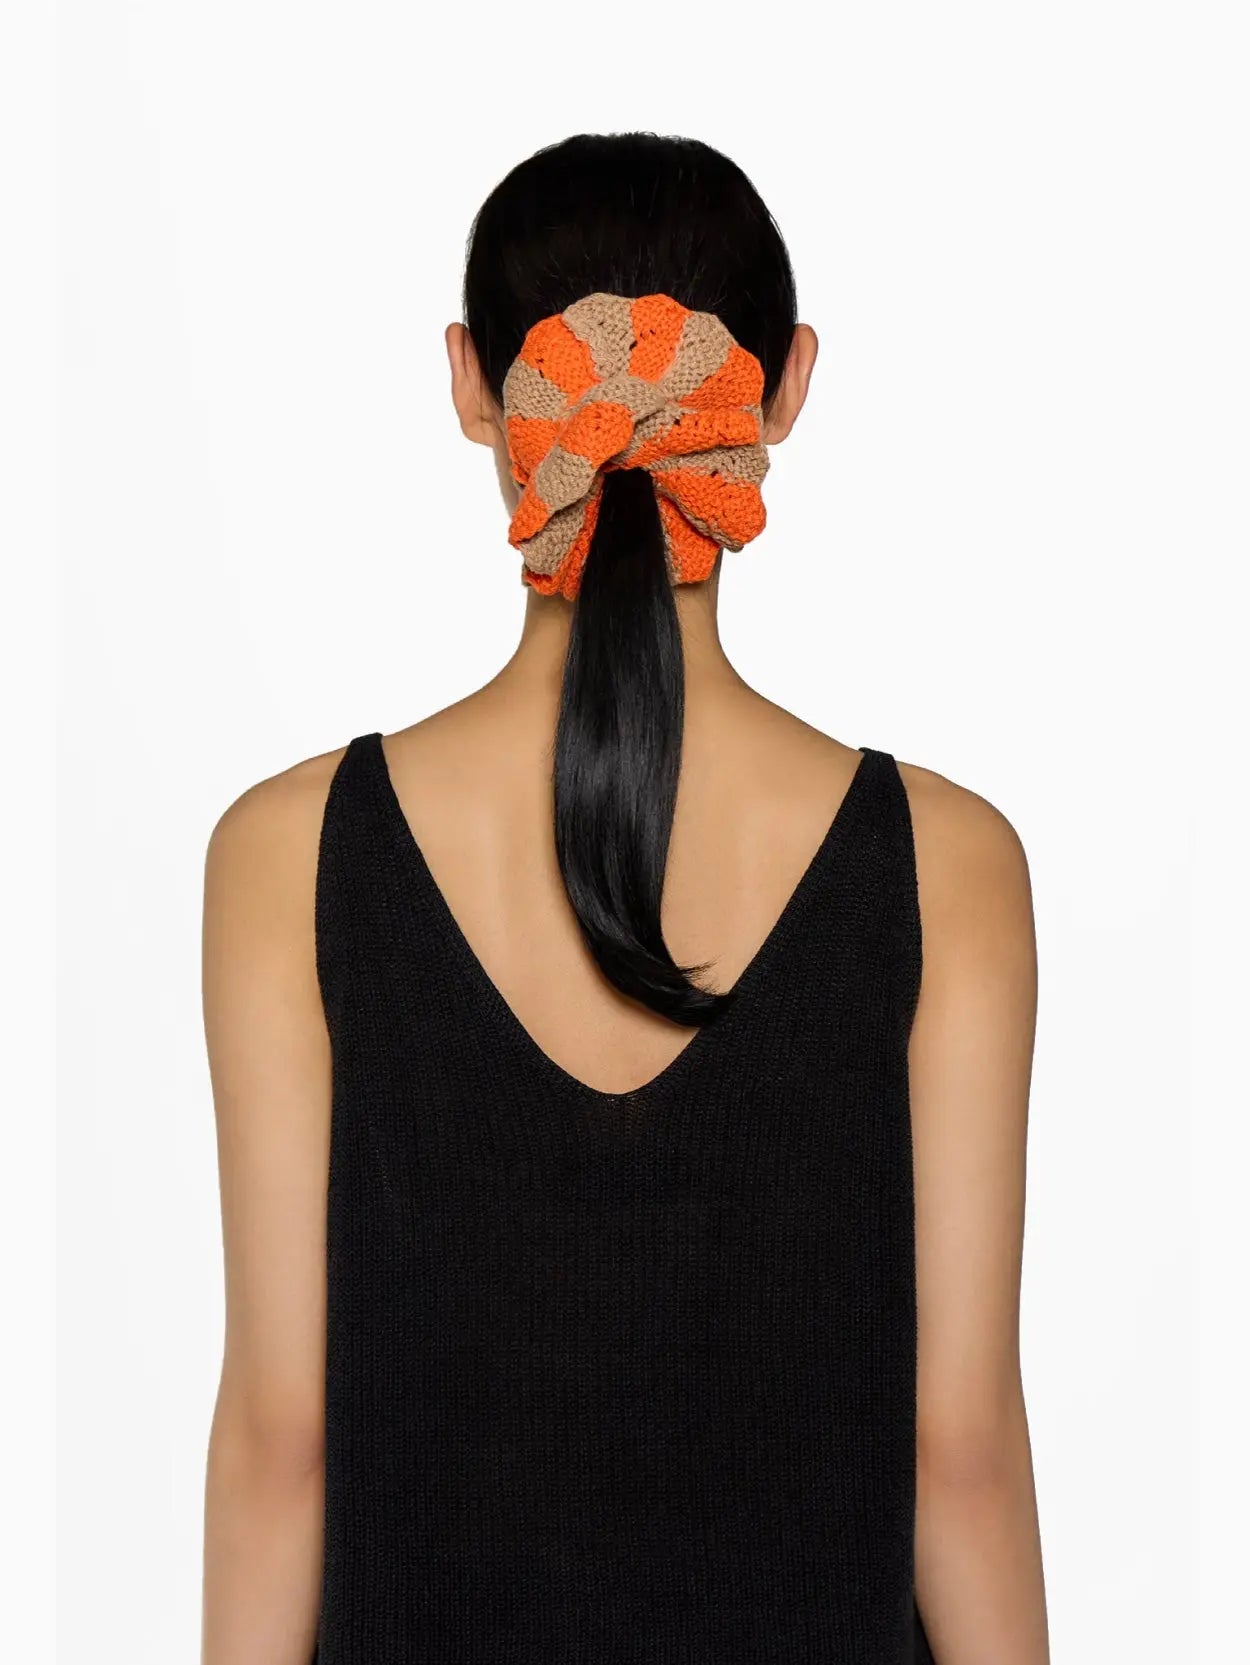 A round, knitted scrunchie in alternating orange and beige segments with a small white label that reads "Tomasa." The Fernandita Scrunchie, available at Bassalstore Barcelona, is placed vertically in the center of a white background.